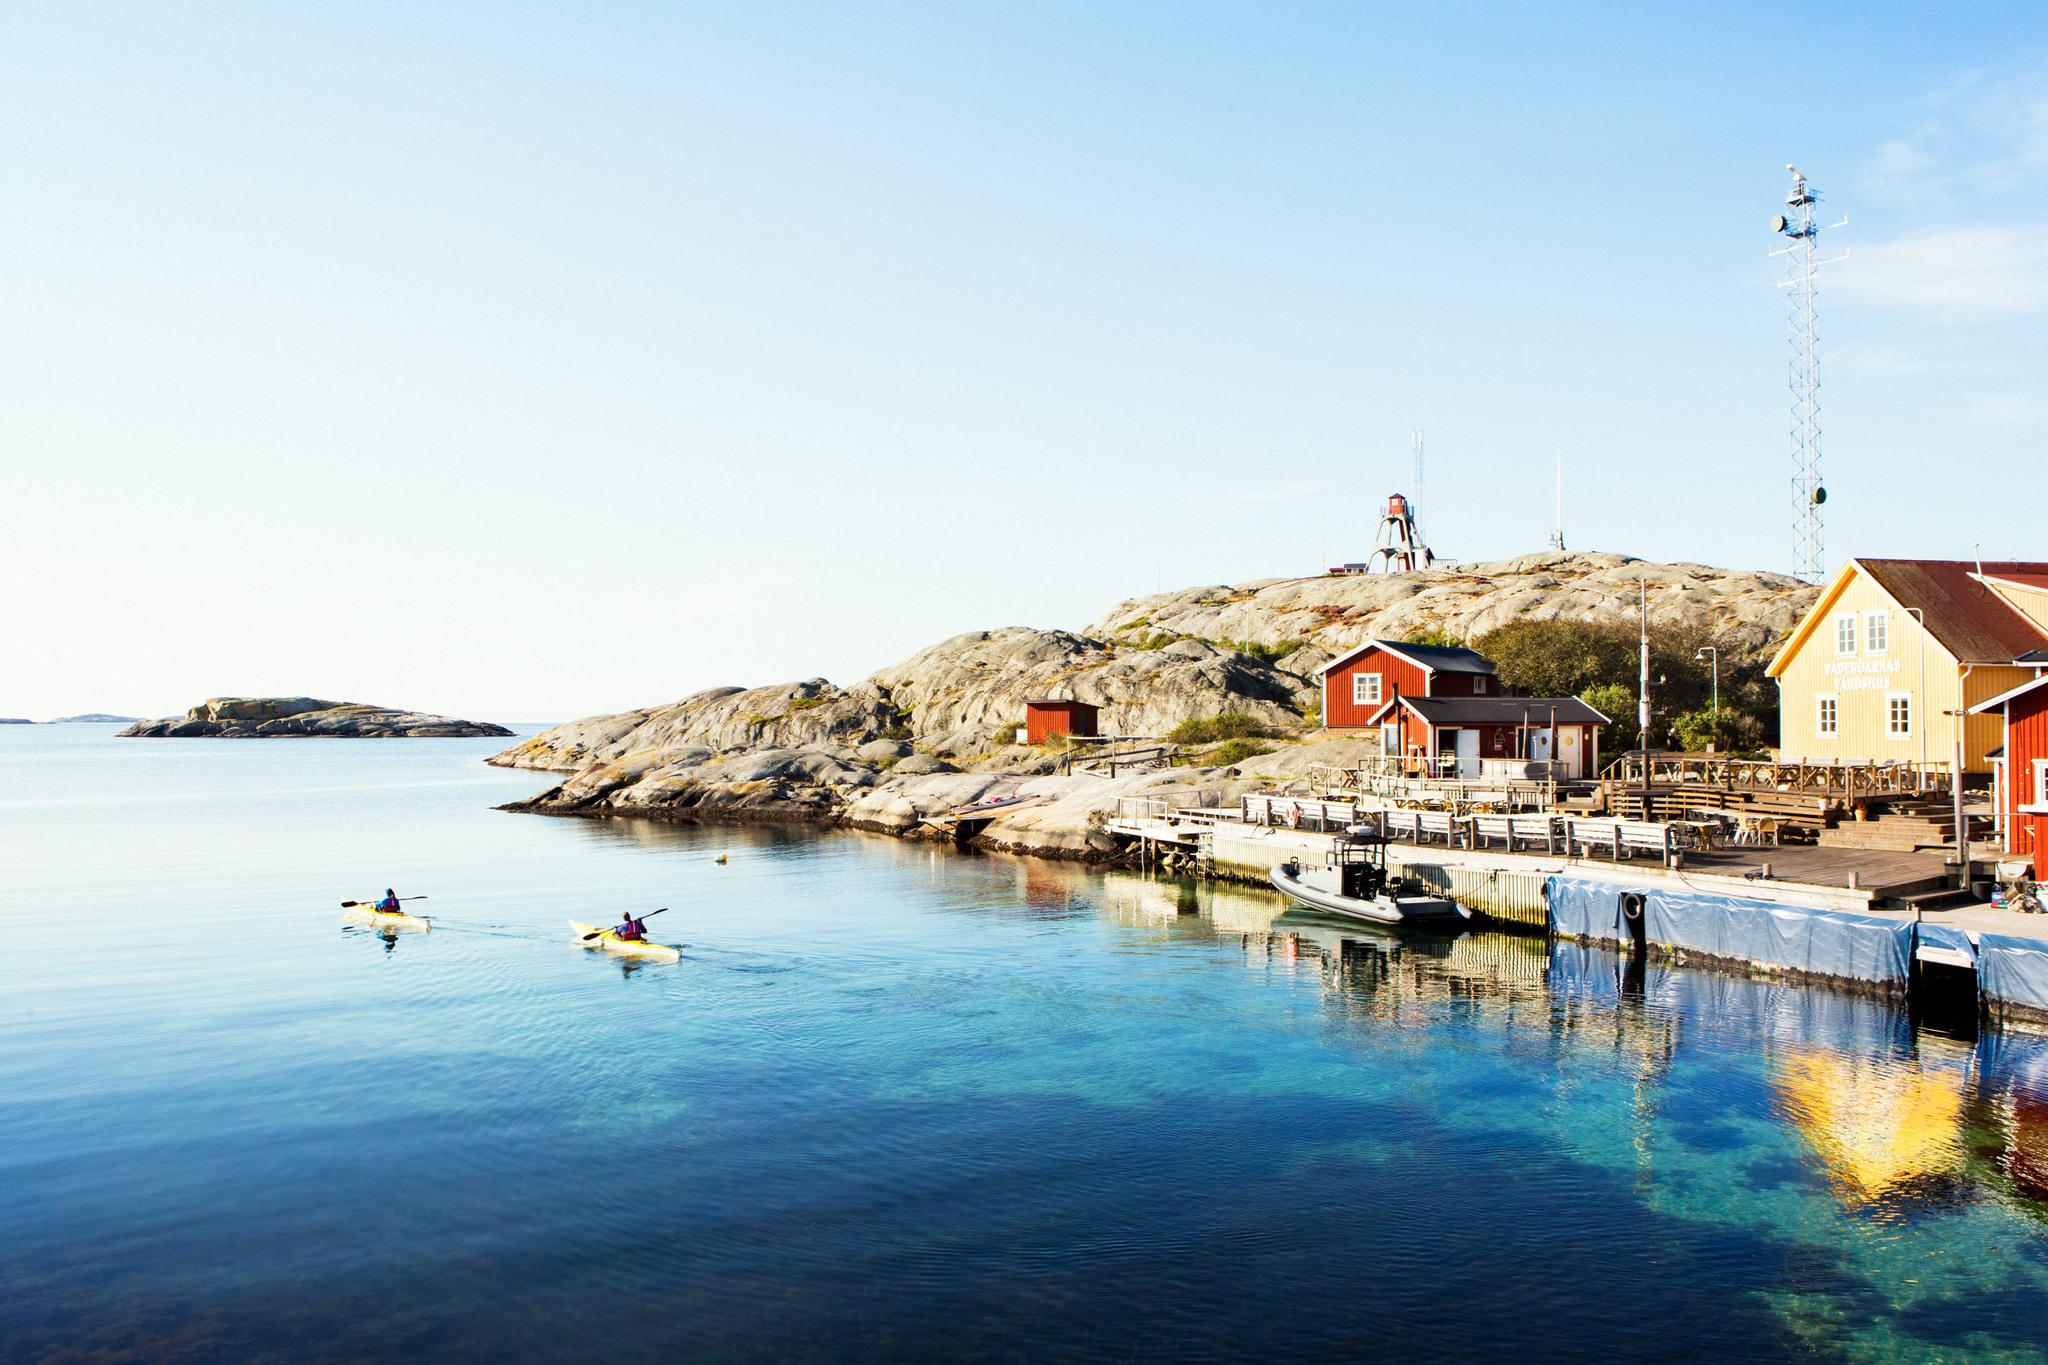 An island with some small houses. In front of it, two people in kayaks in the sea.